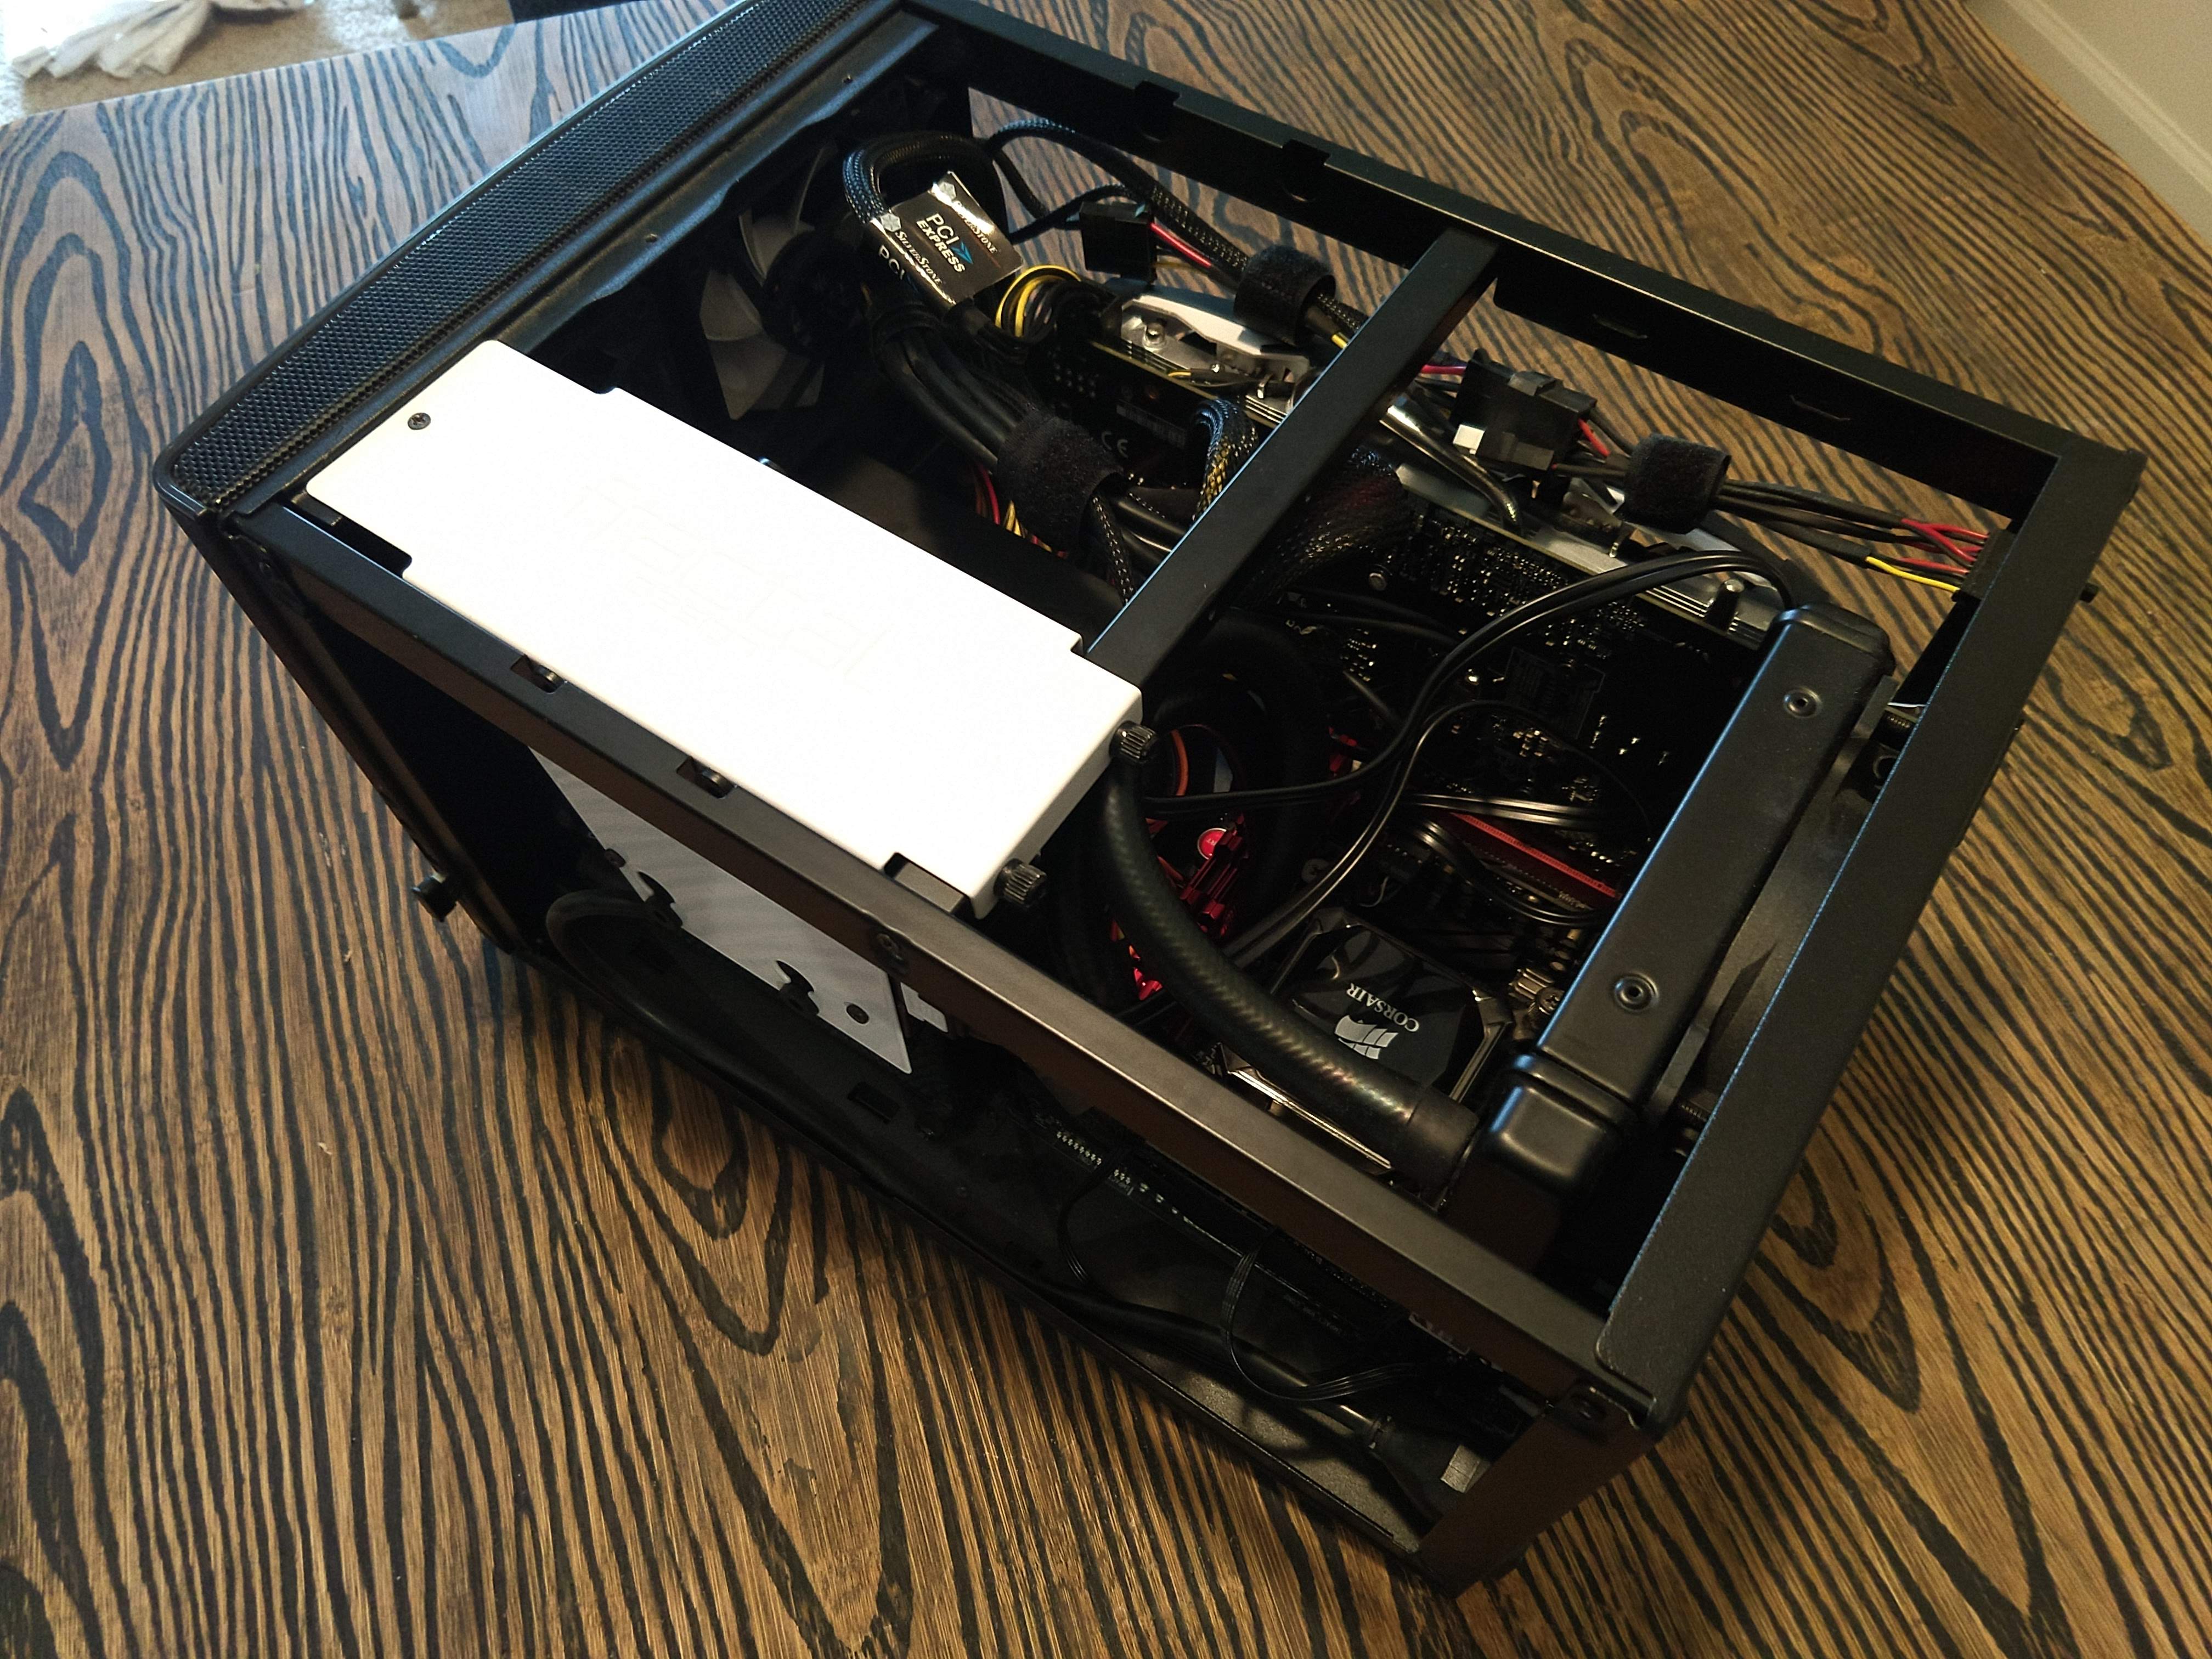 Photo of a computer in the mini-ITX format with the enclosure removed.